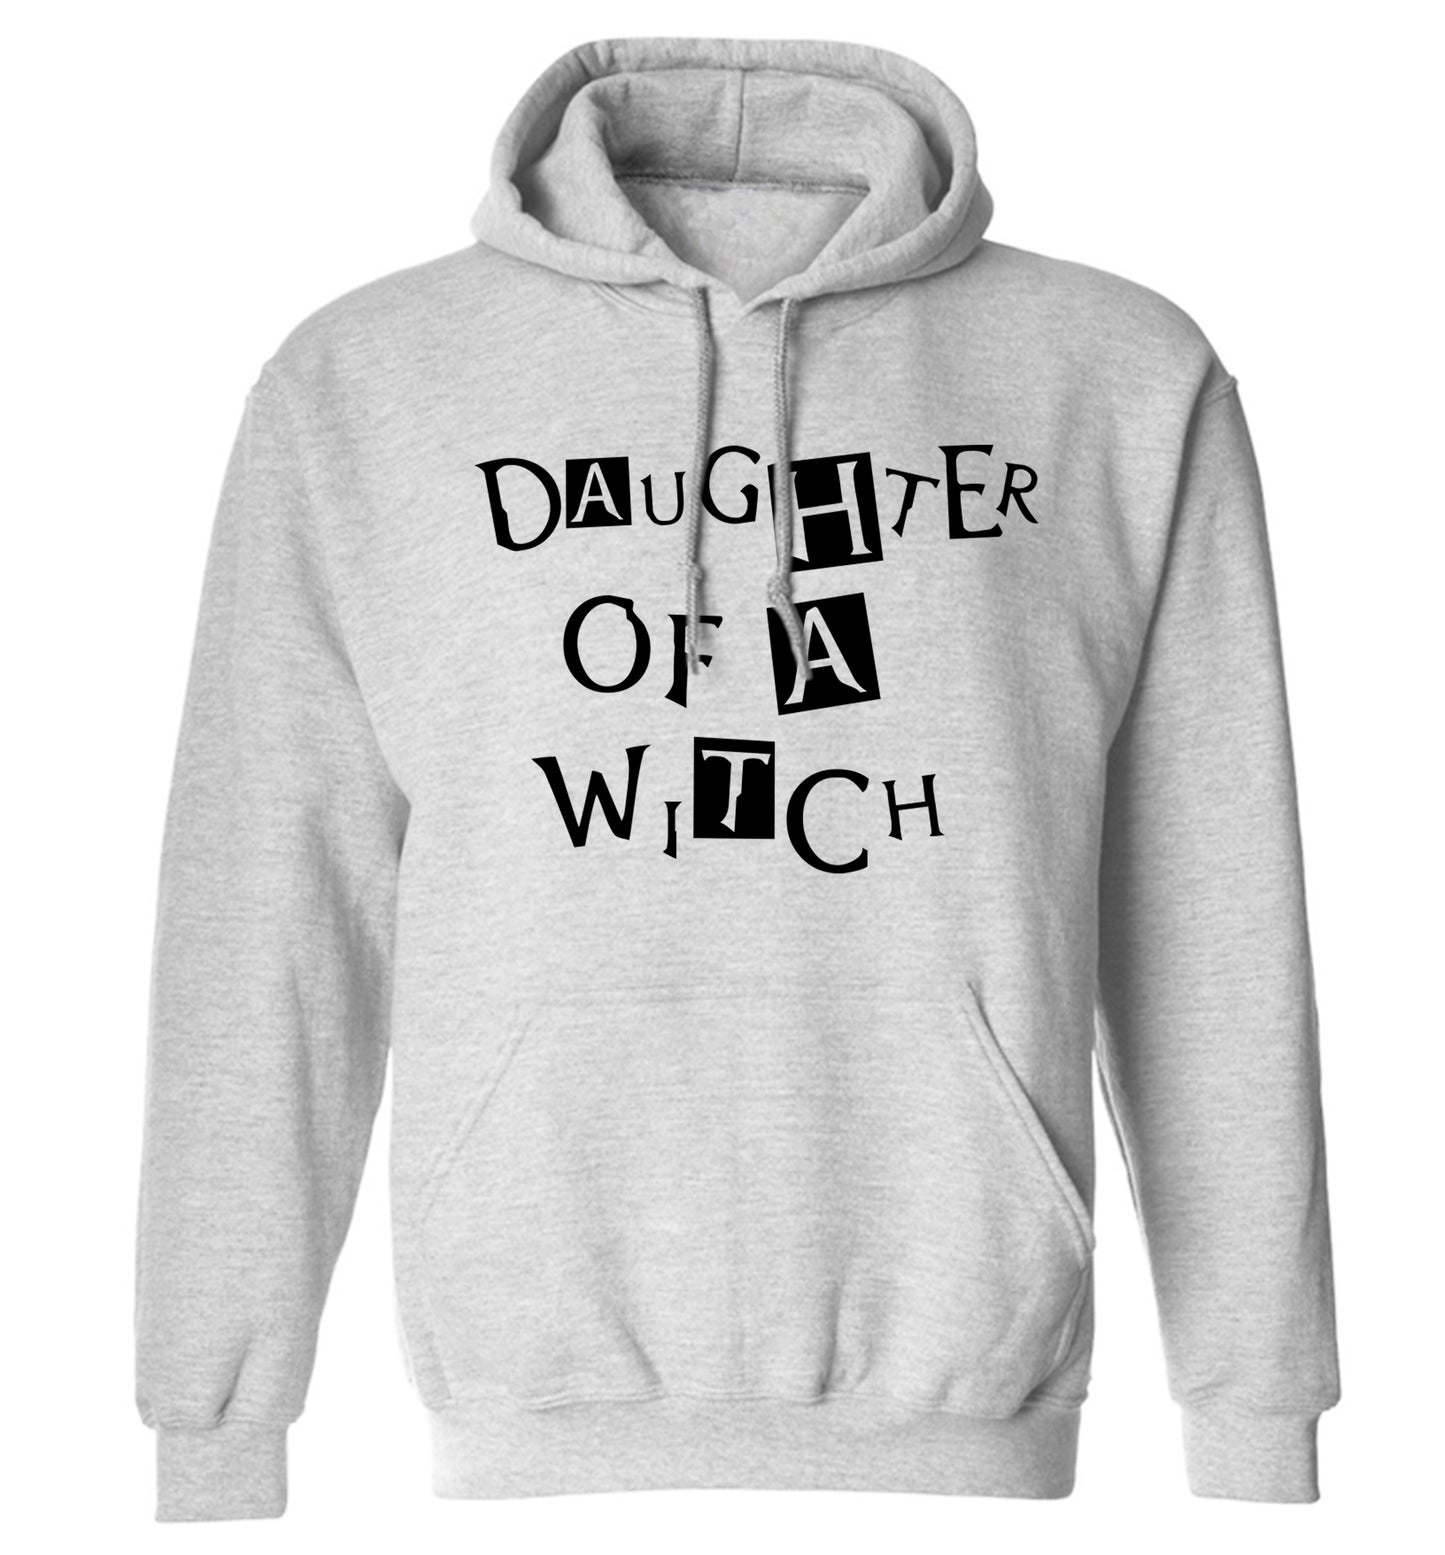 Daughter of a witch adults unisex grey hoodie 2XL